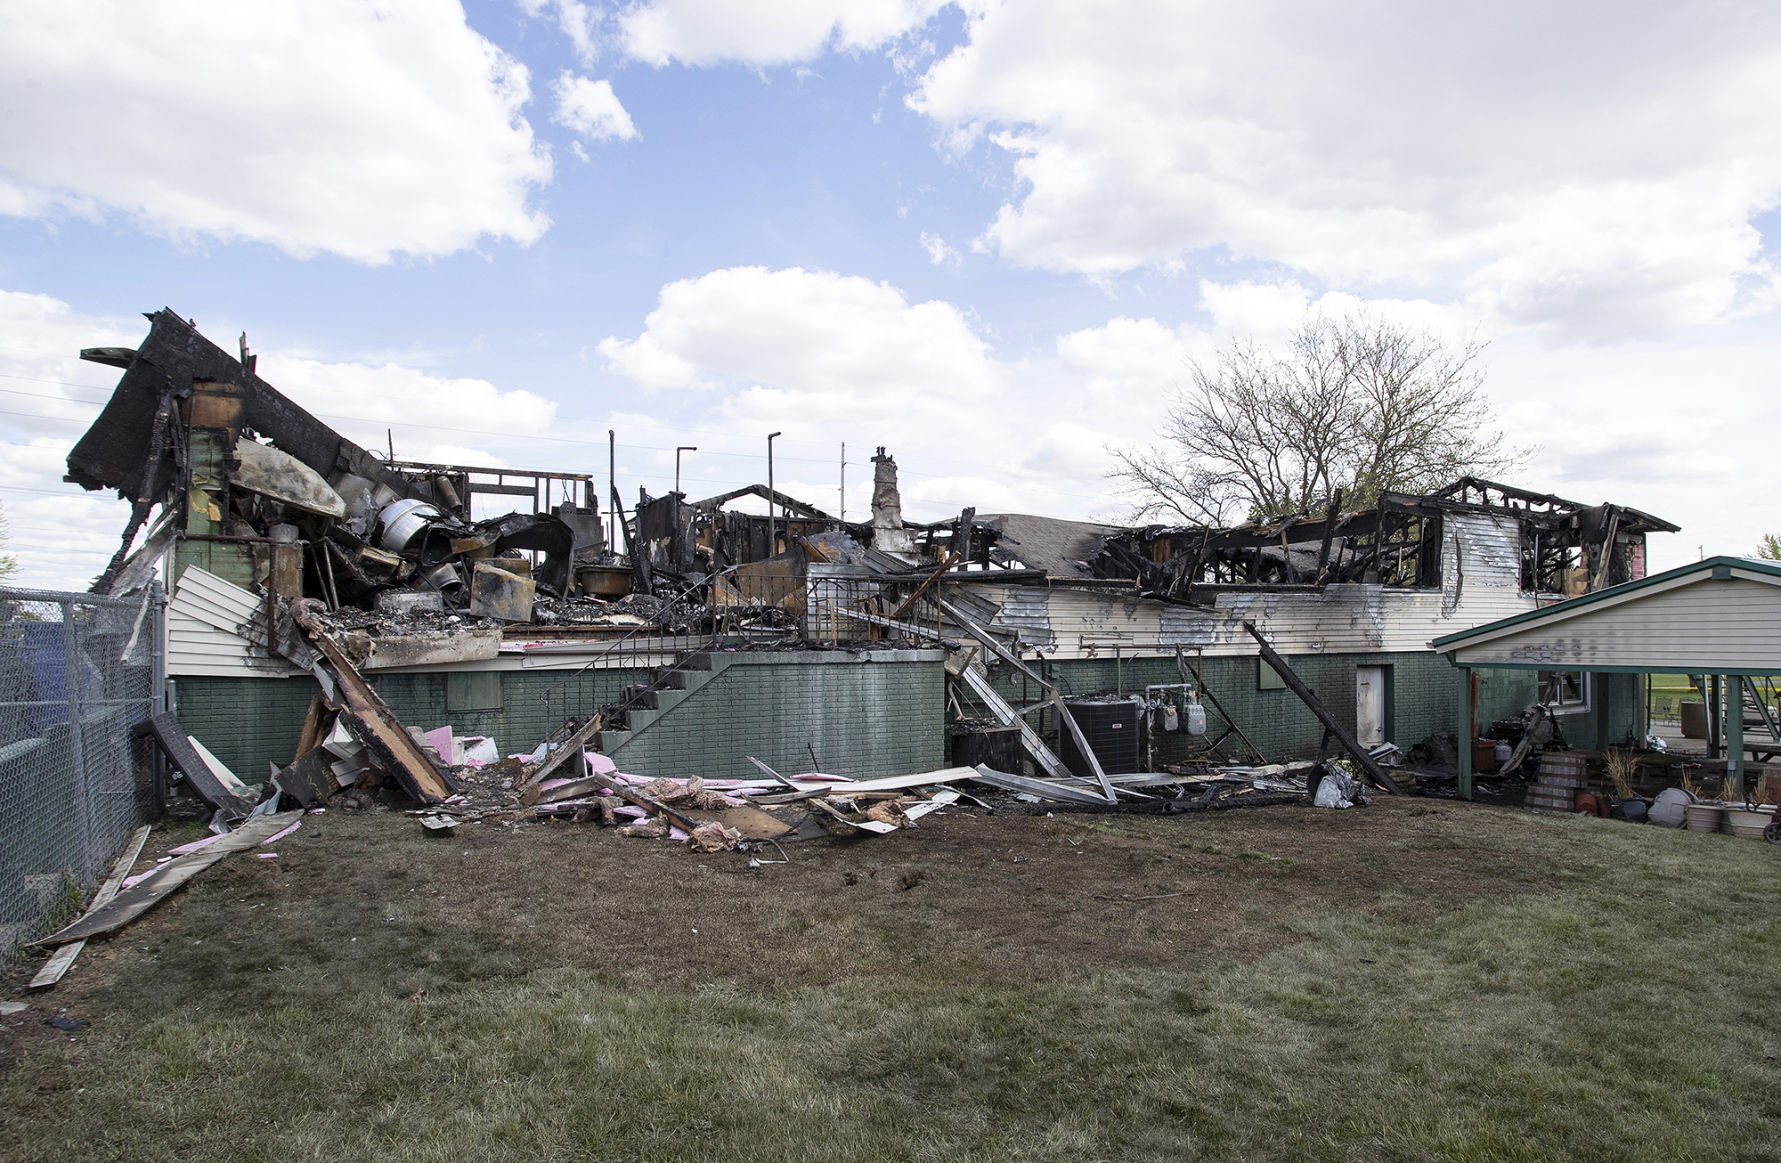 A fire destroyed the clubhouse at Cole Acres Golf and Supper Club in rural Cuba City, Wis., early Sunday. PHOTO CREDIT: Stephen Gassman